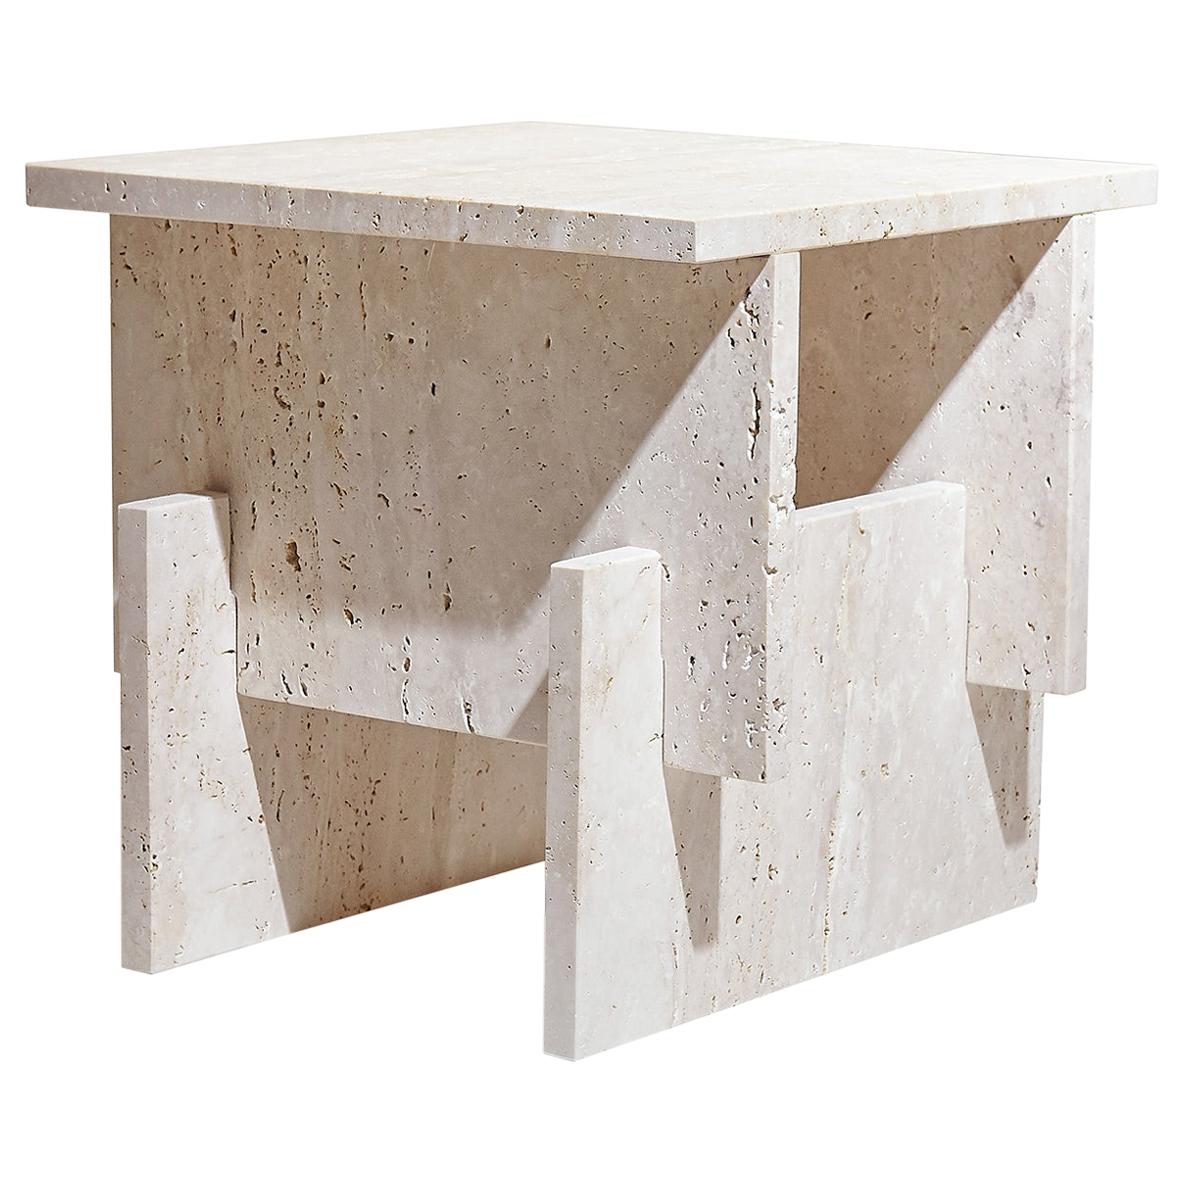 "Fit Side Table" Minimalist Travertine Cream Marble Side Table by Aparentment